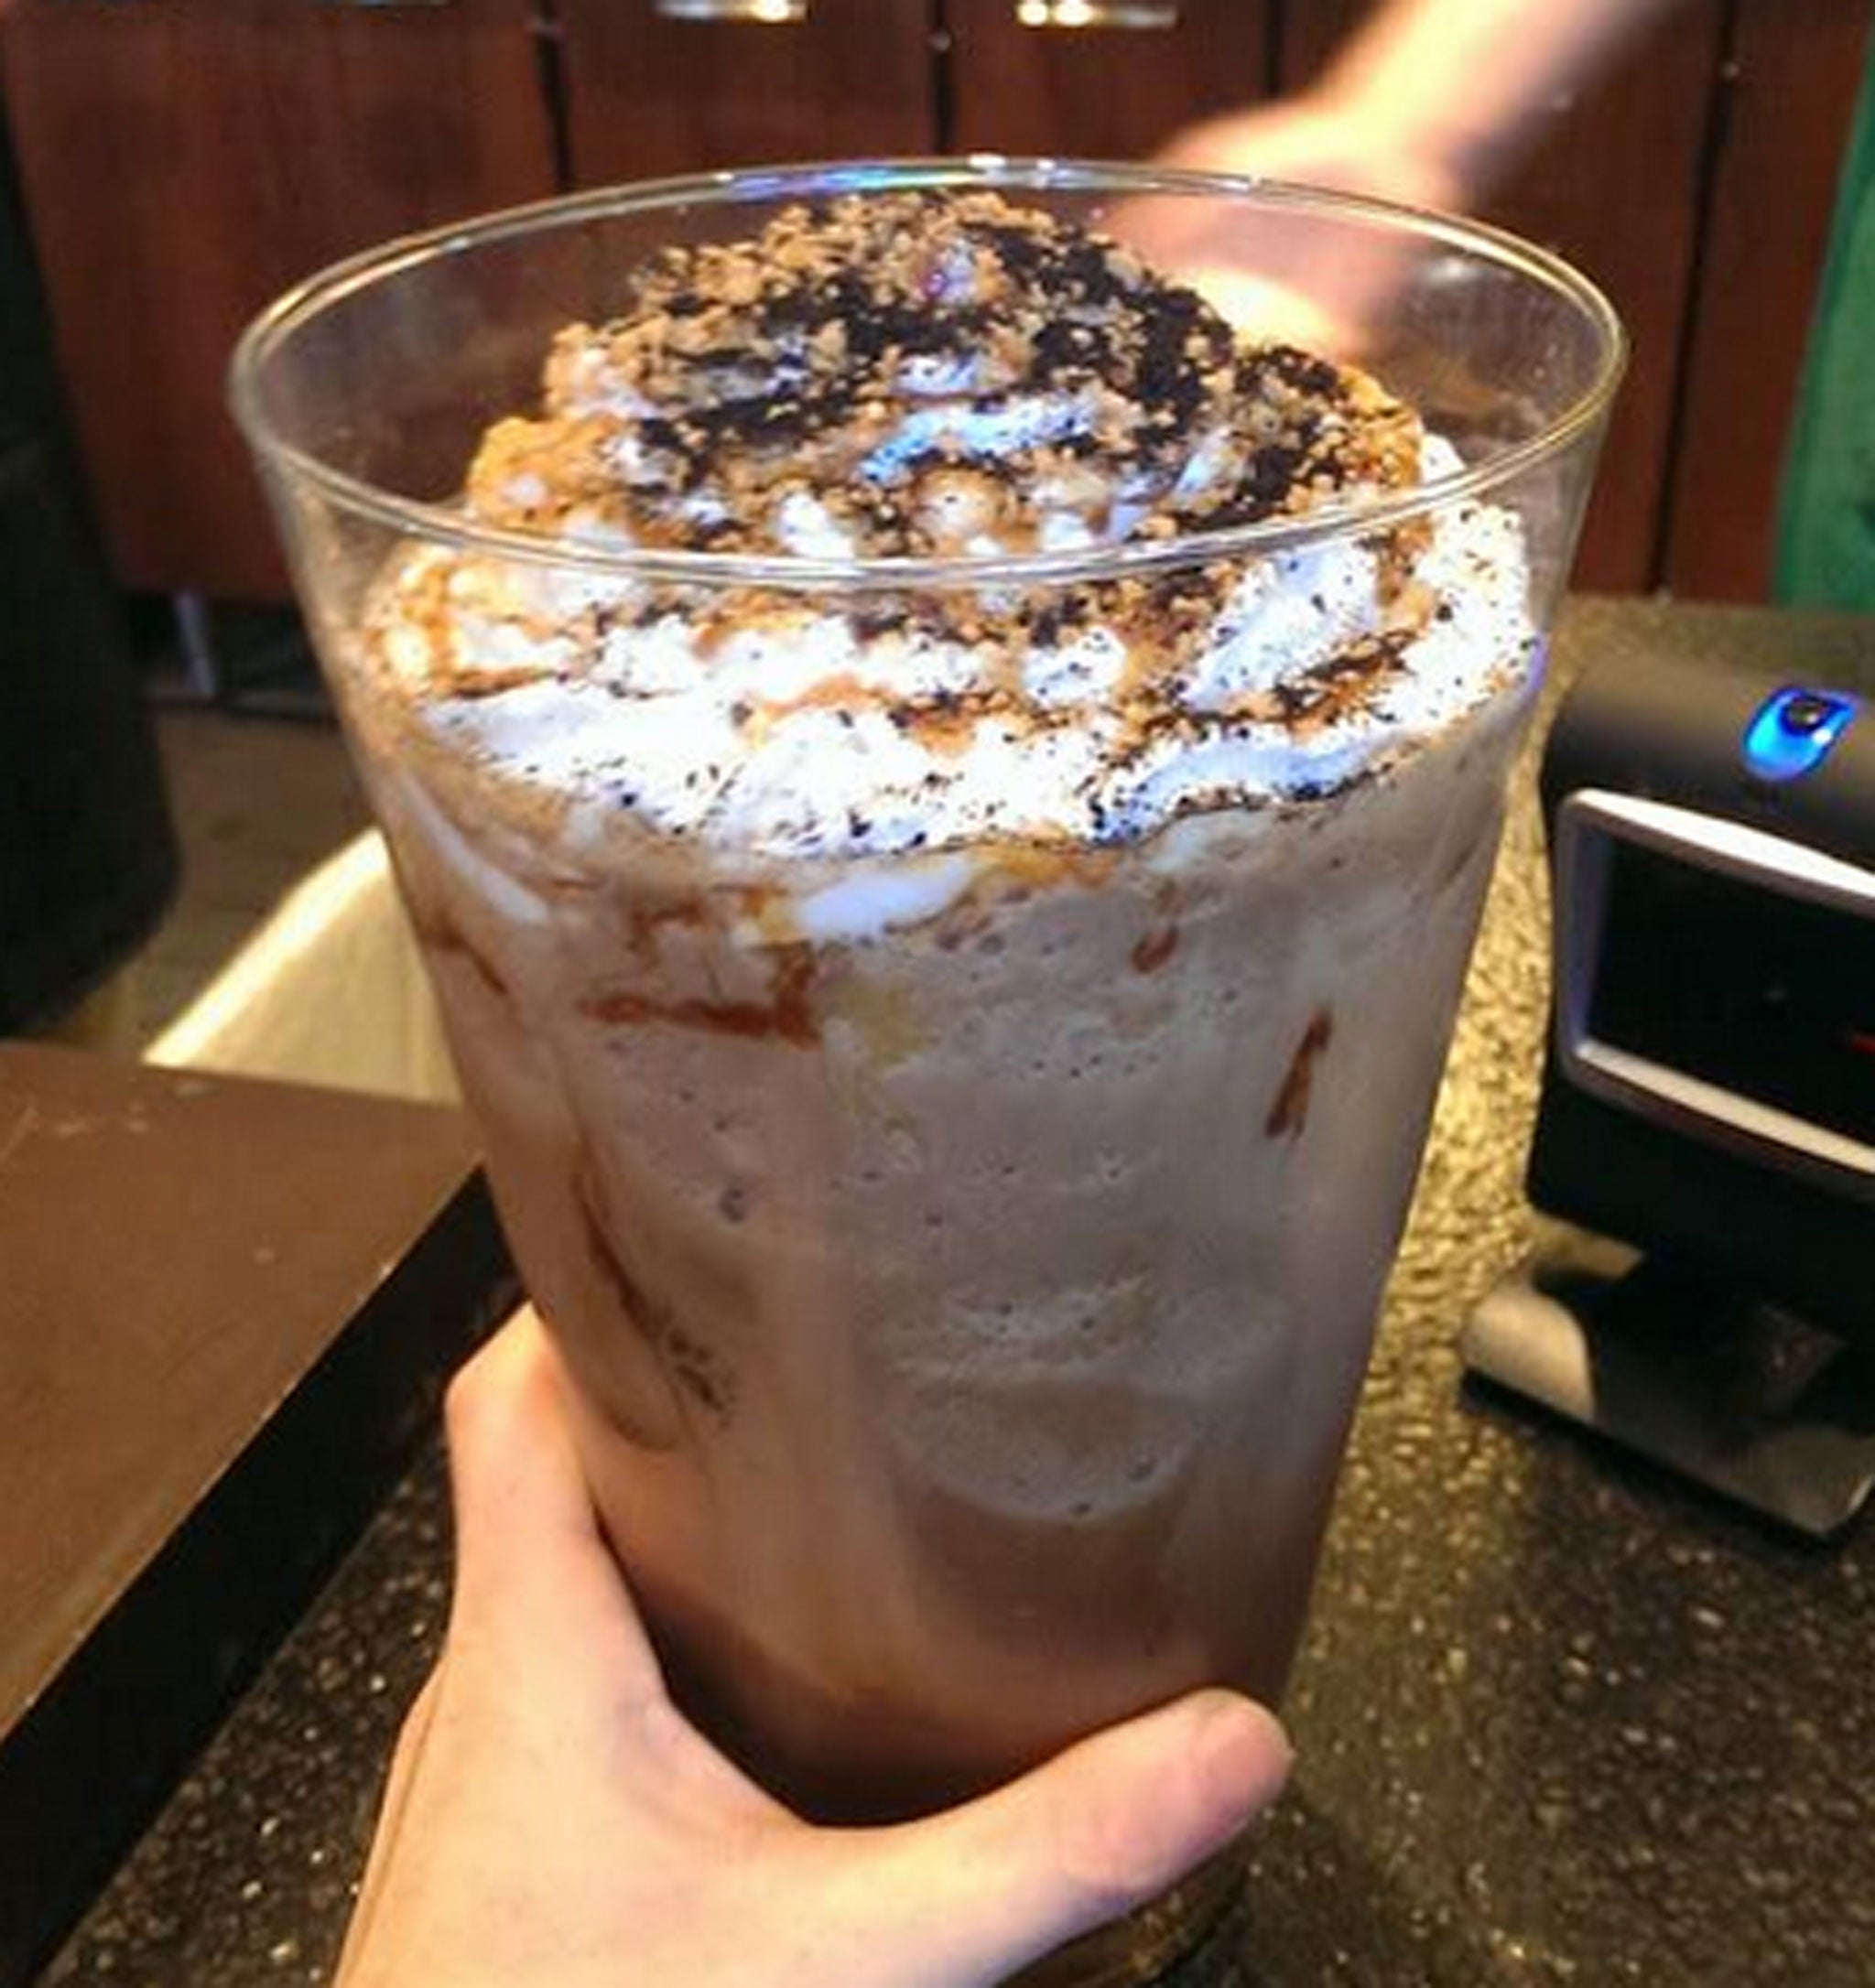 The drink was created at a Starbucks branch in Dallas, Texas